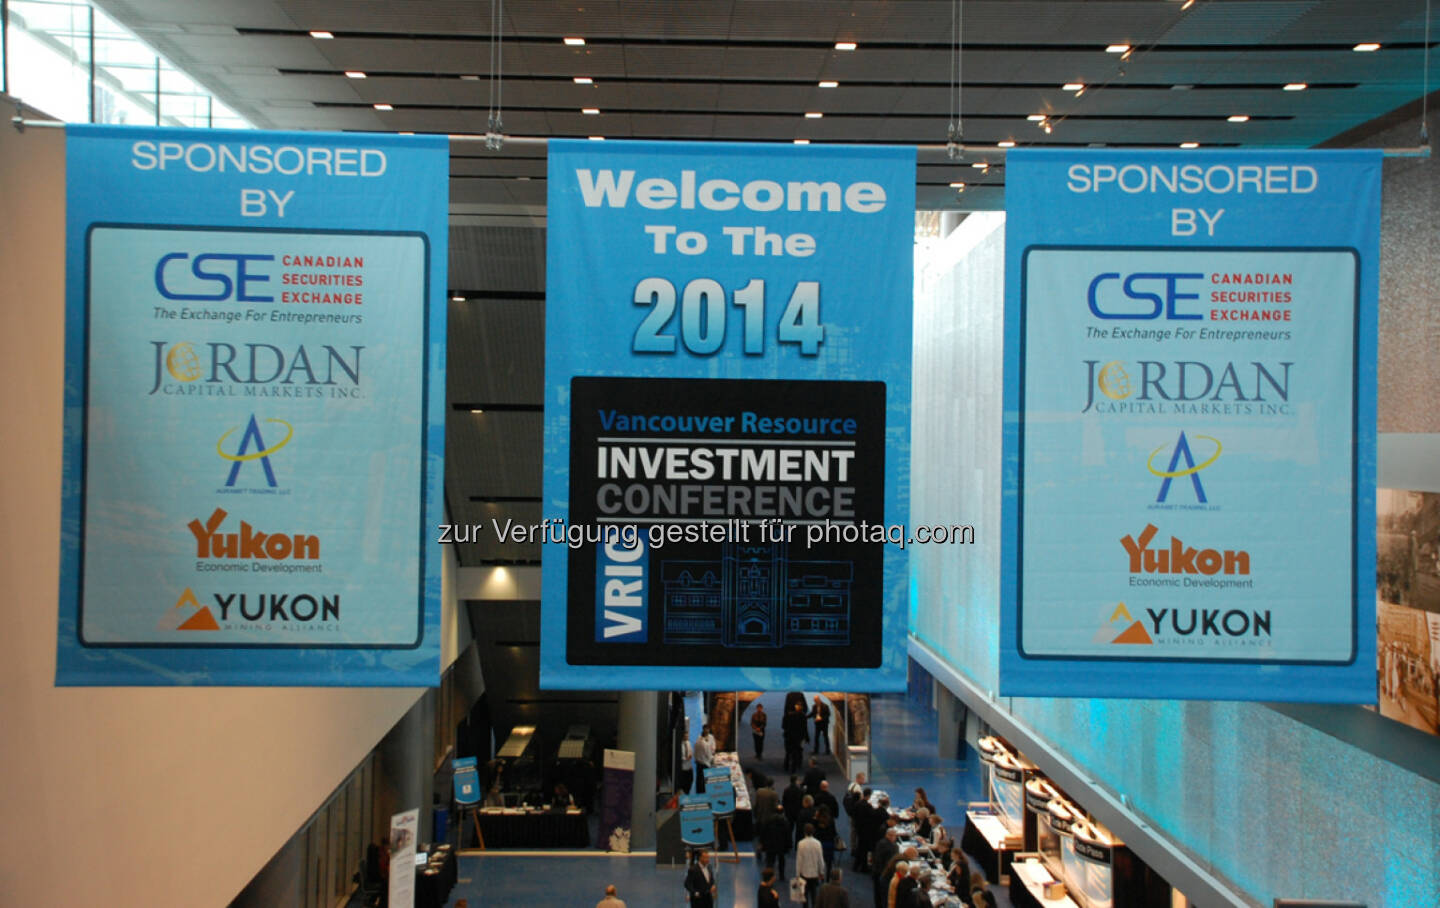 Entrance Banners at the 2014 Vancouver Resource Investment Conference